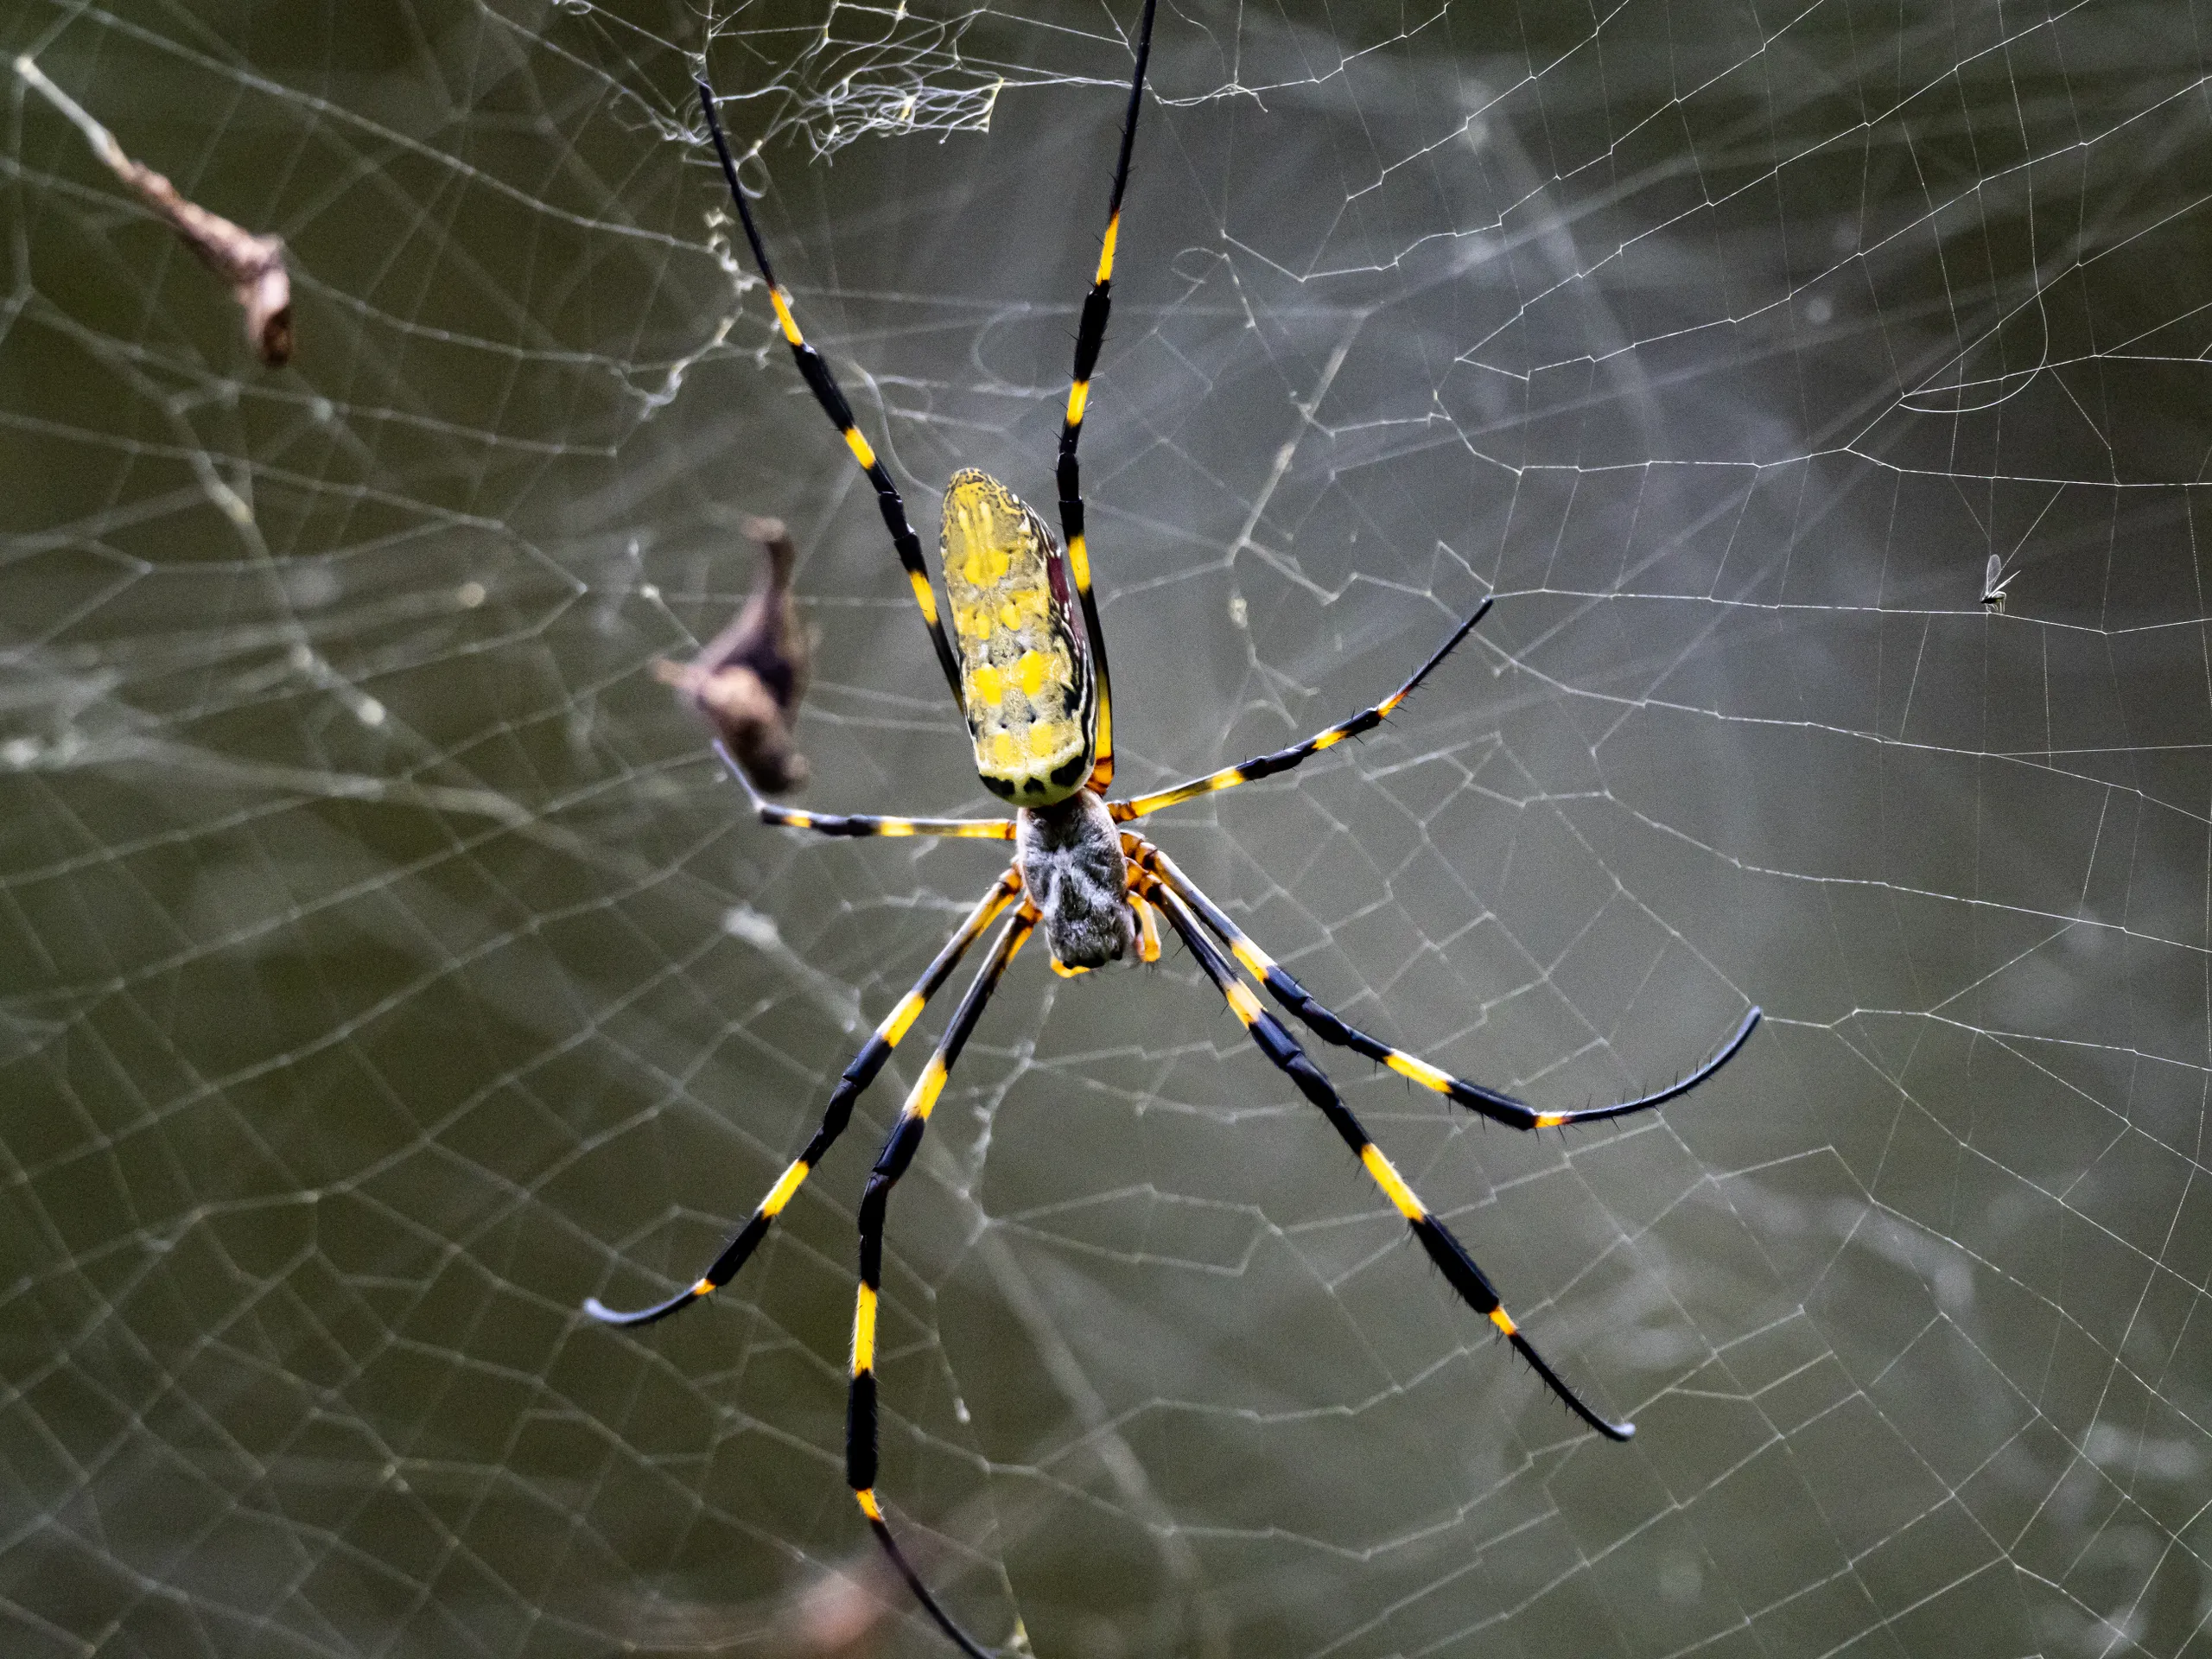 A blue and yellow Joro spider on its web. Spider removal requests increased in the summer of 2024 as the spiders spread across the US east coast and South